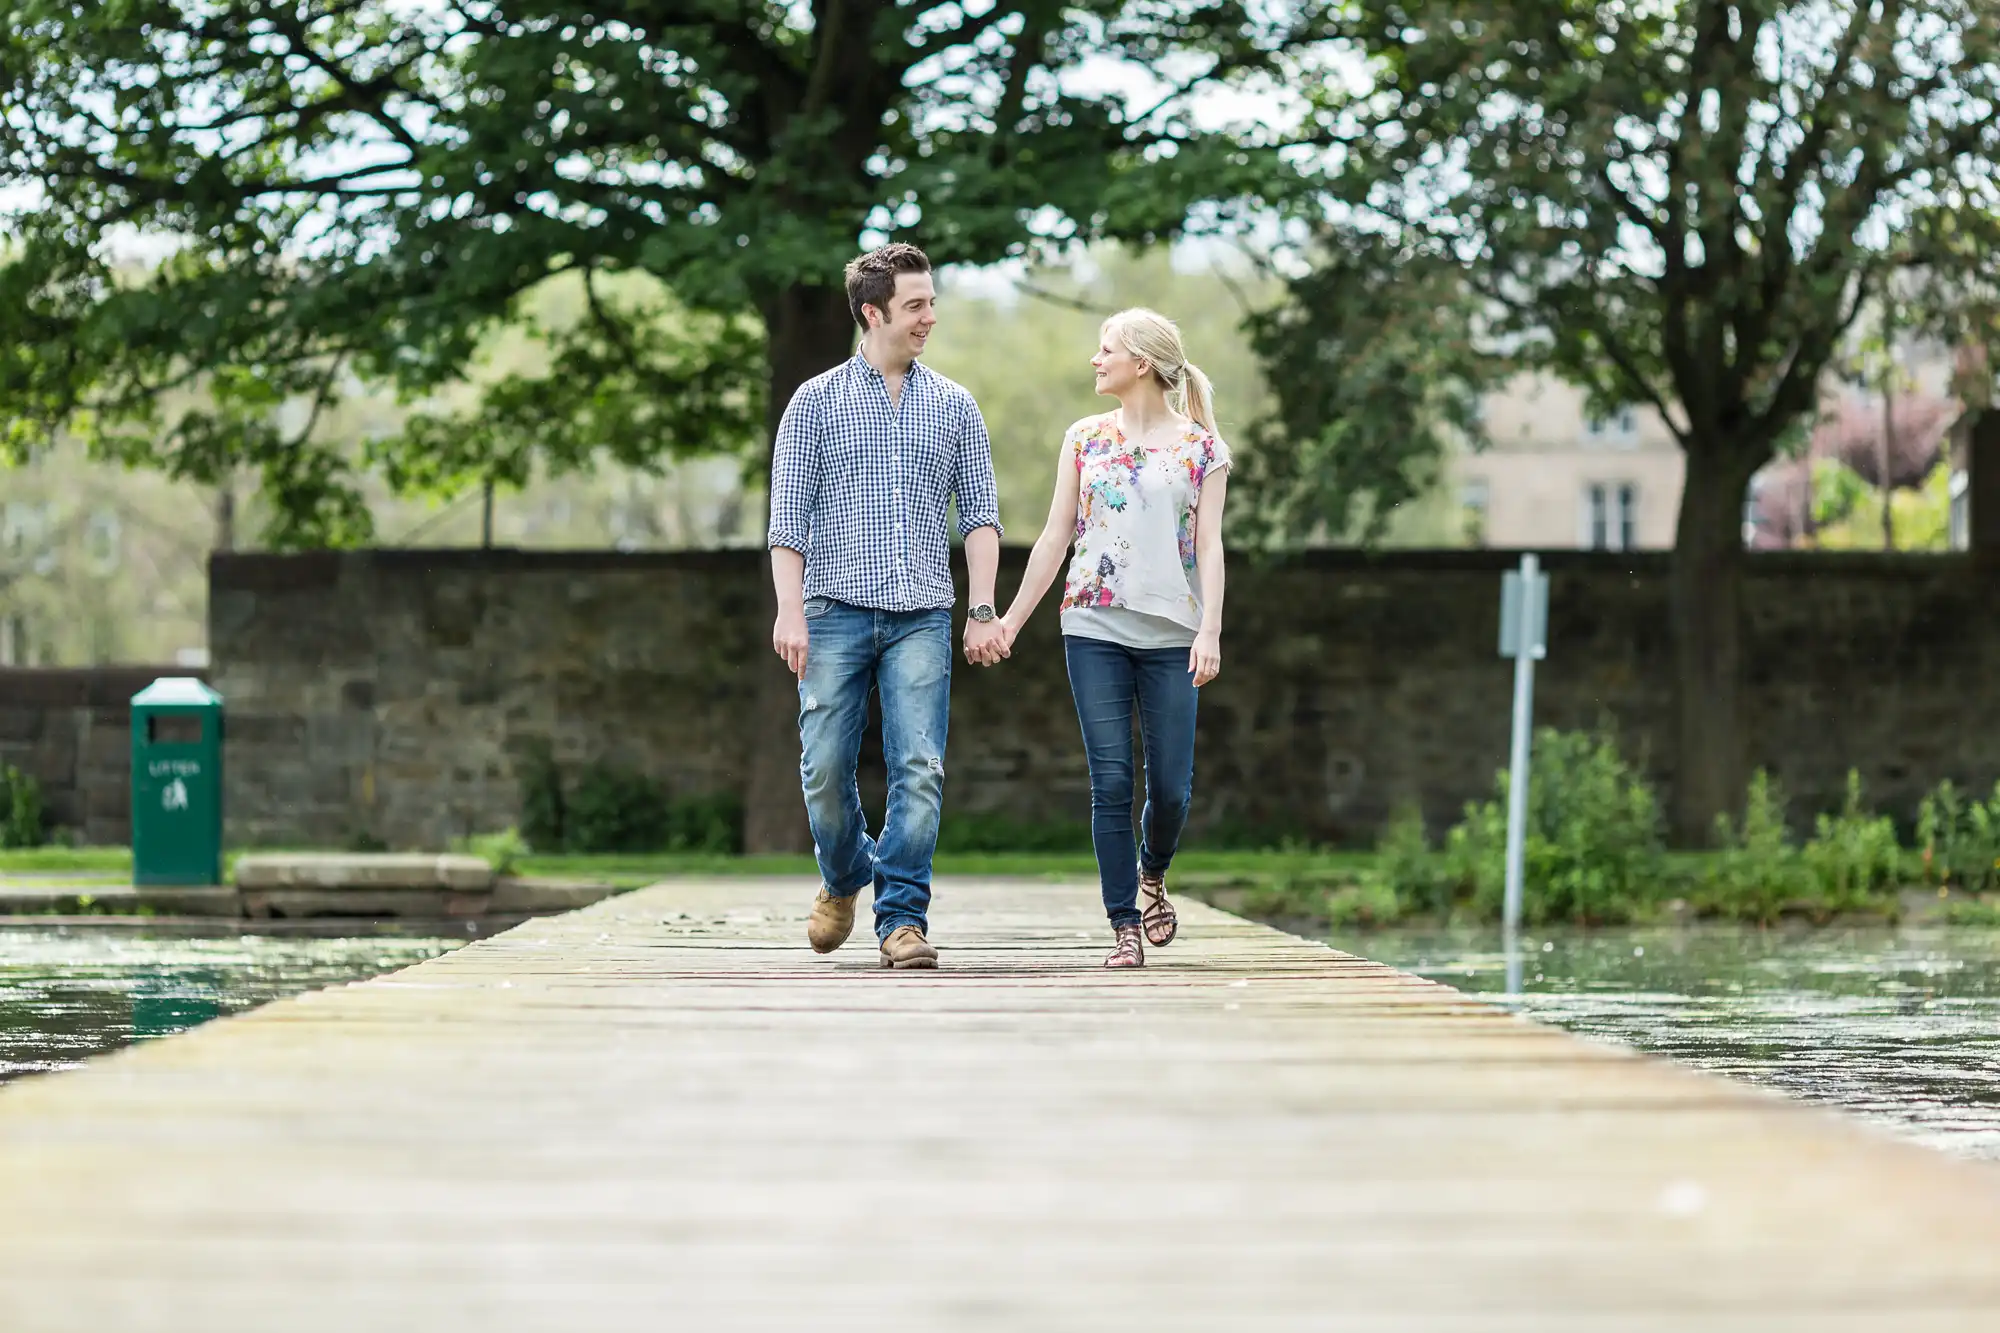 A couple holding hands walking down a wooden pier, both smiling at each other, with trees and greenery in the background.